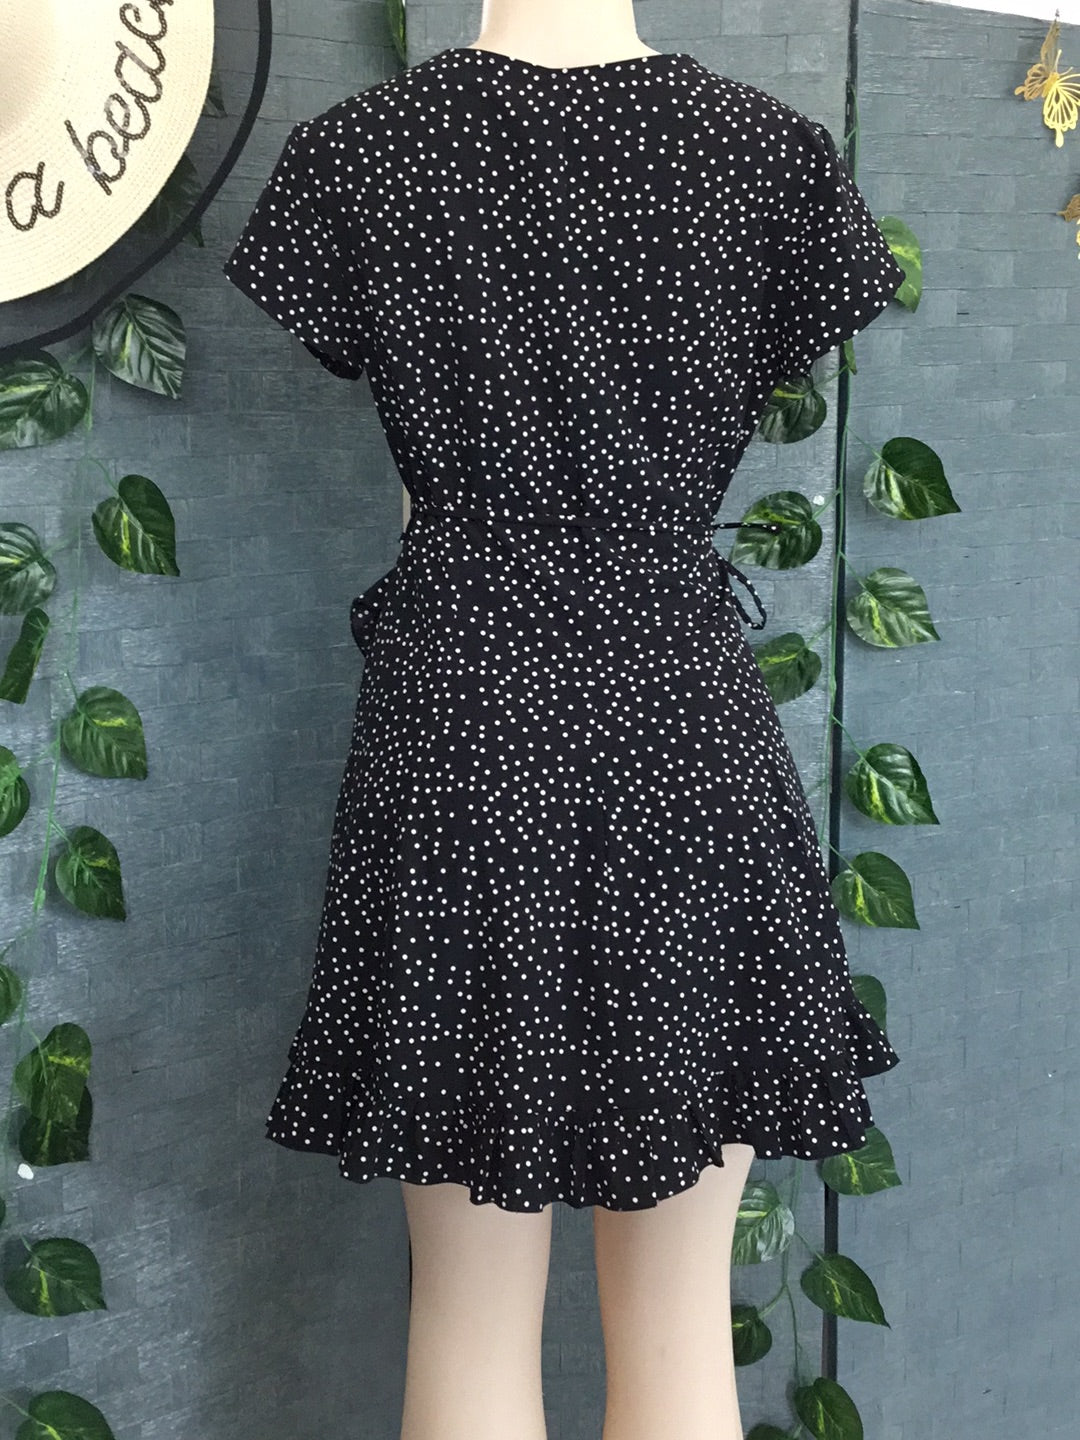 Black Polka Dot Mini Dress with wrap around front fastening & frill at bottom - Size XS